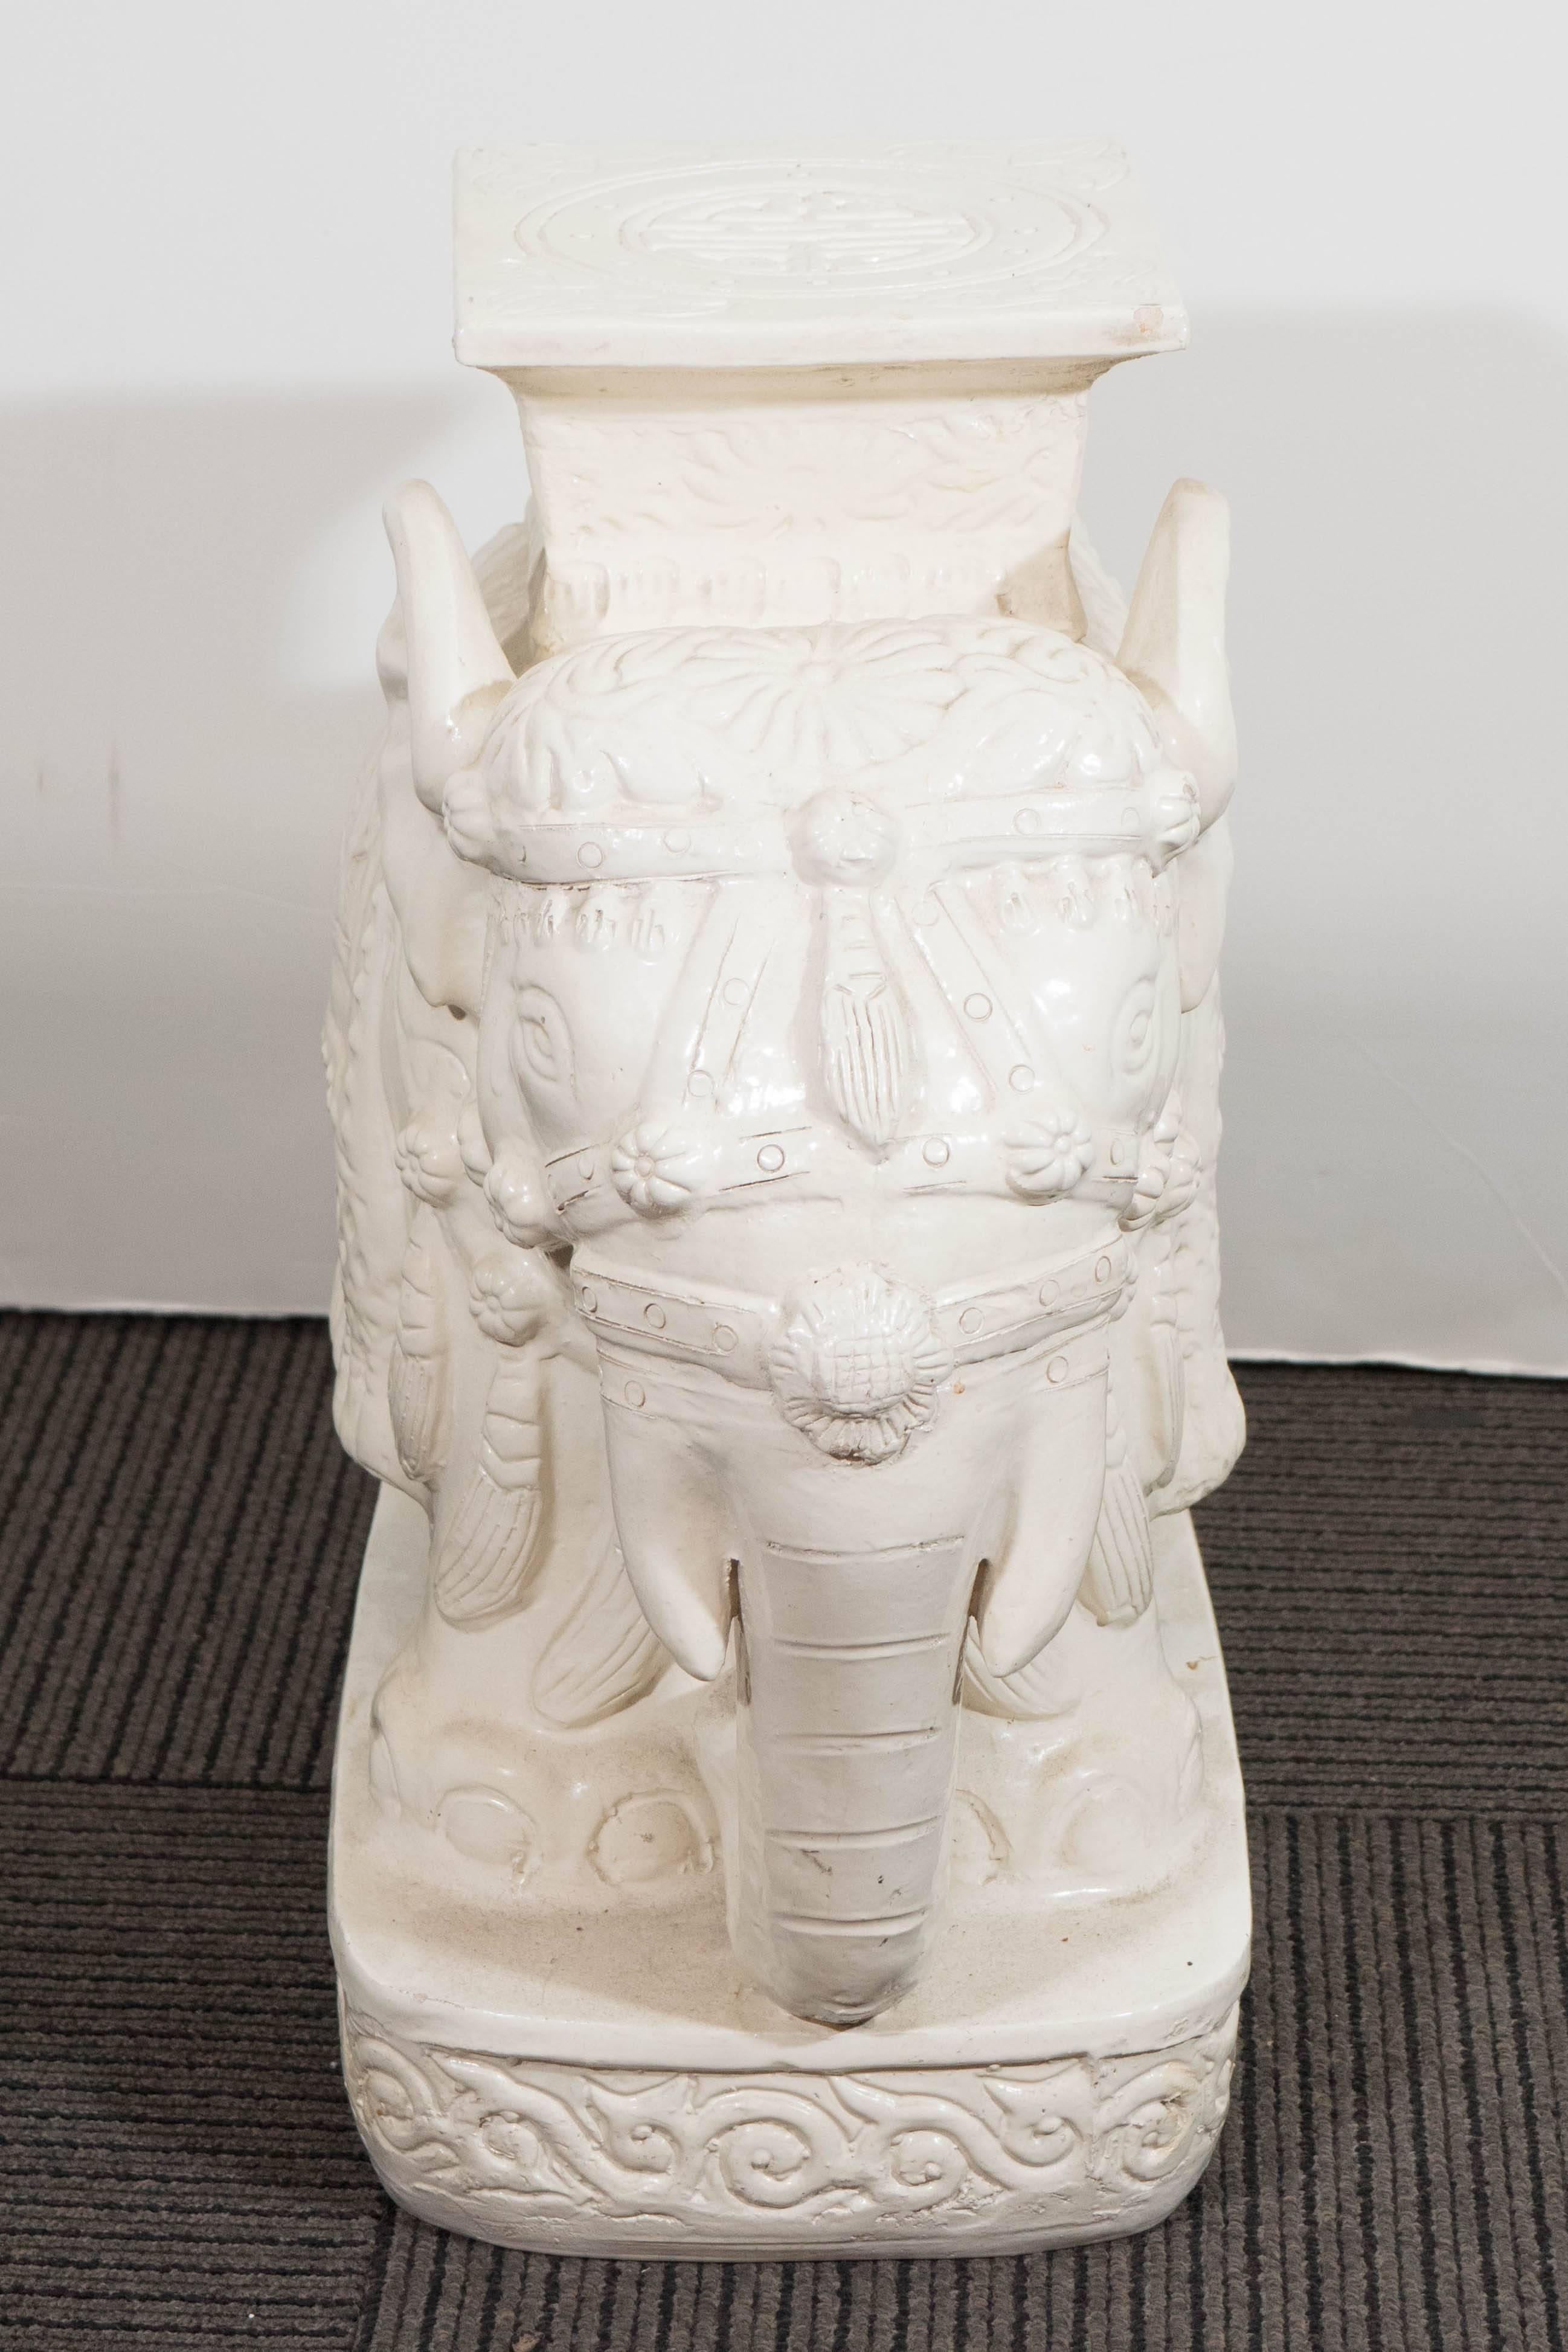 A pair of vintage Asian inspired elephant garden stools, each in ivory toned glazed terracotta, with incised details. The stools remain in good condition, with age appropriate wear, including some small chips to the finish.